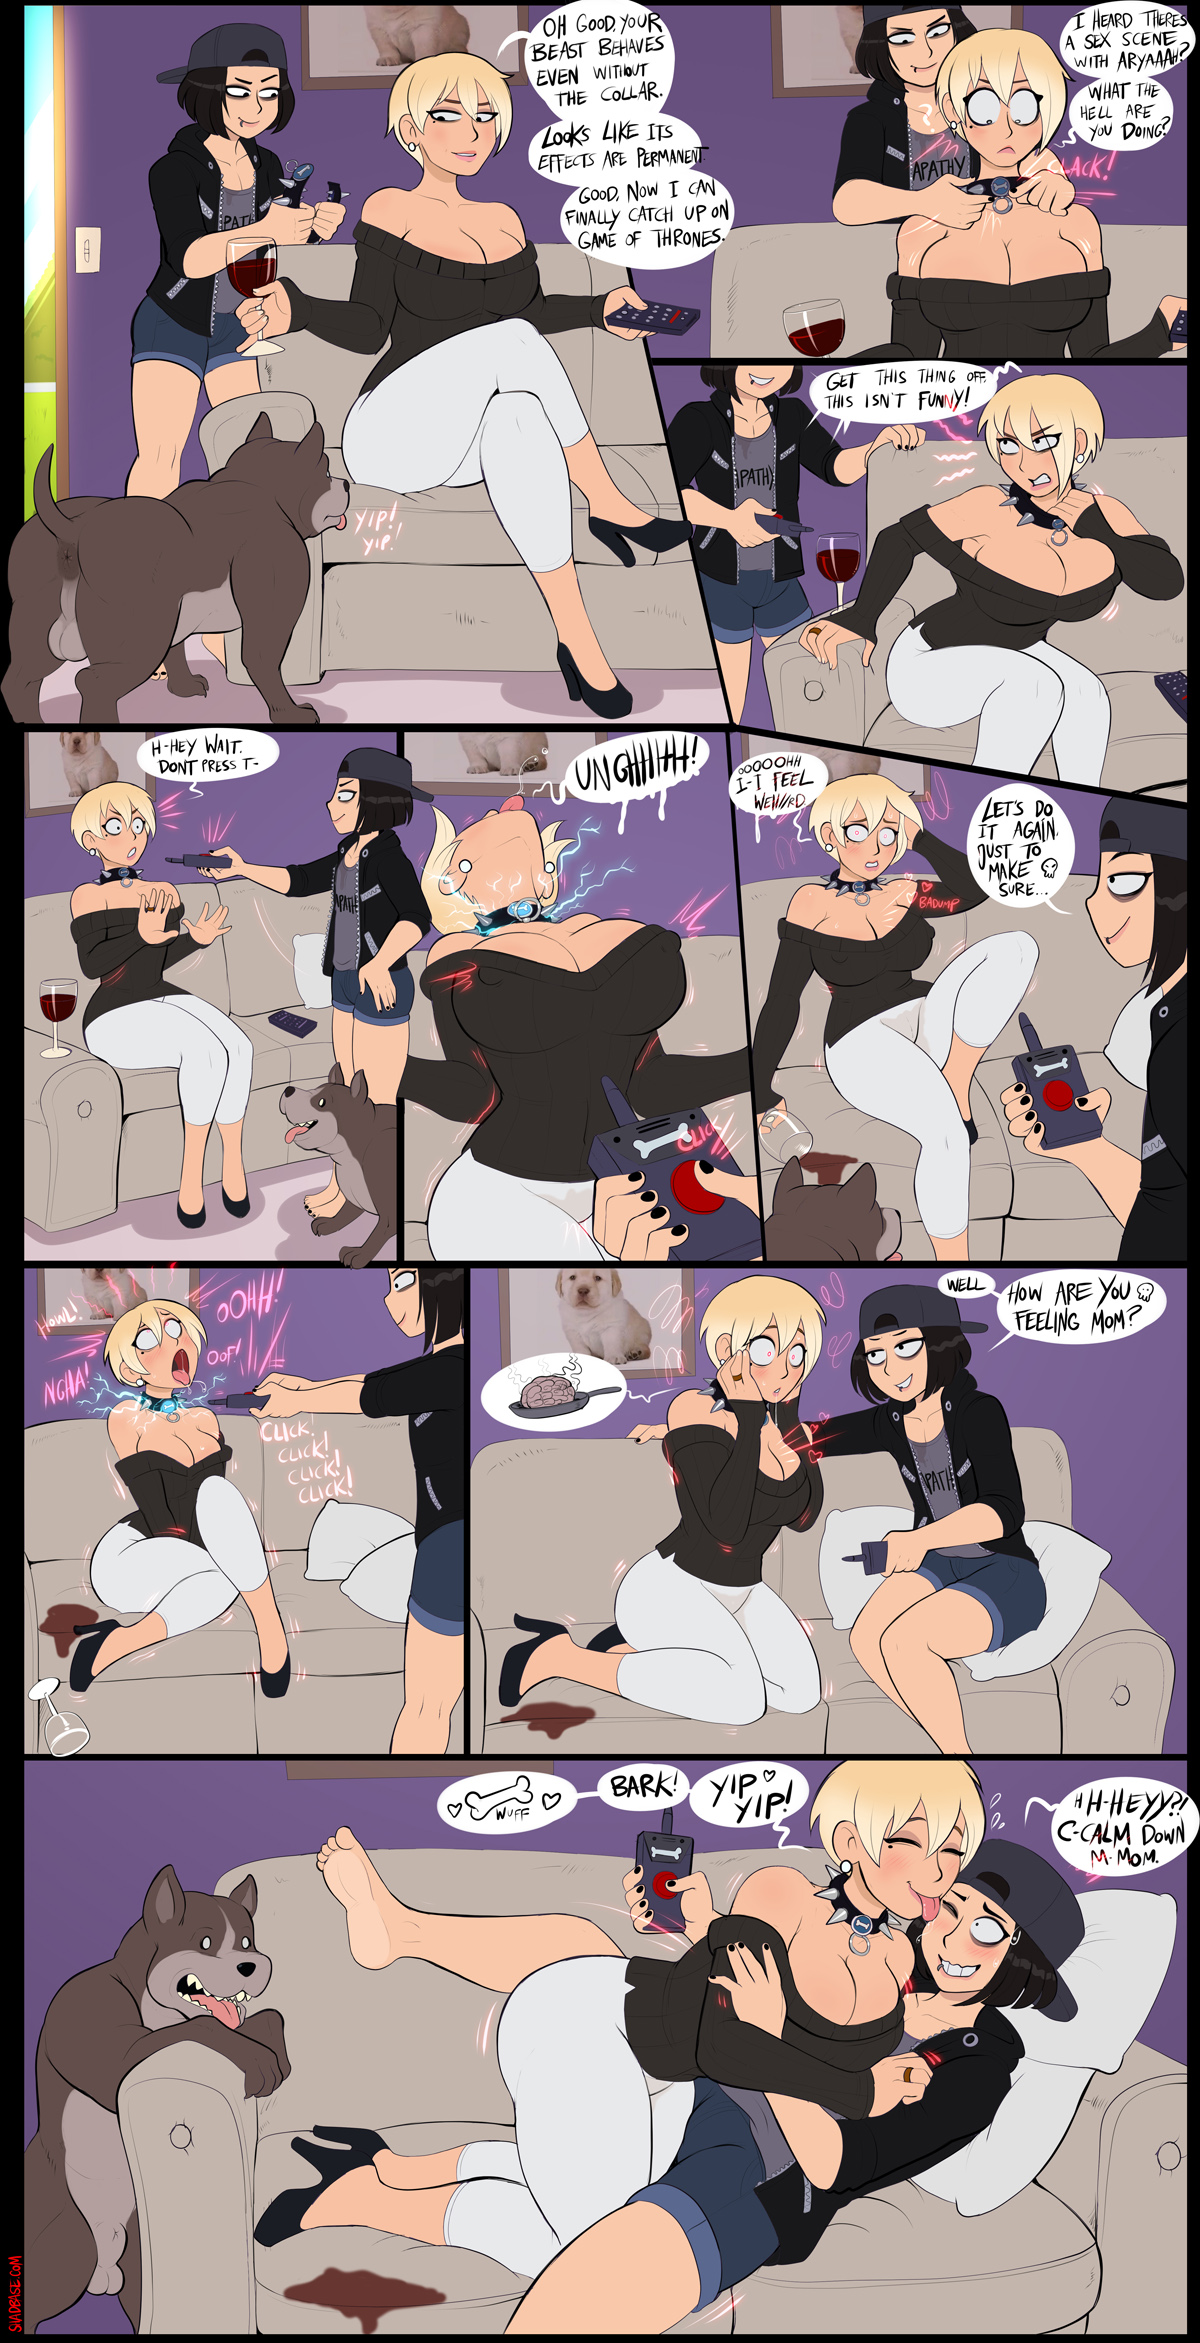 Funny Adult Humor One Shot Comics For Edgelords Porn Jokes And Memes 1691